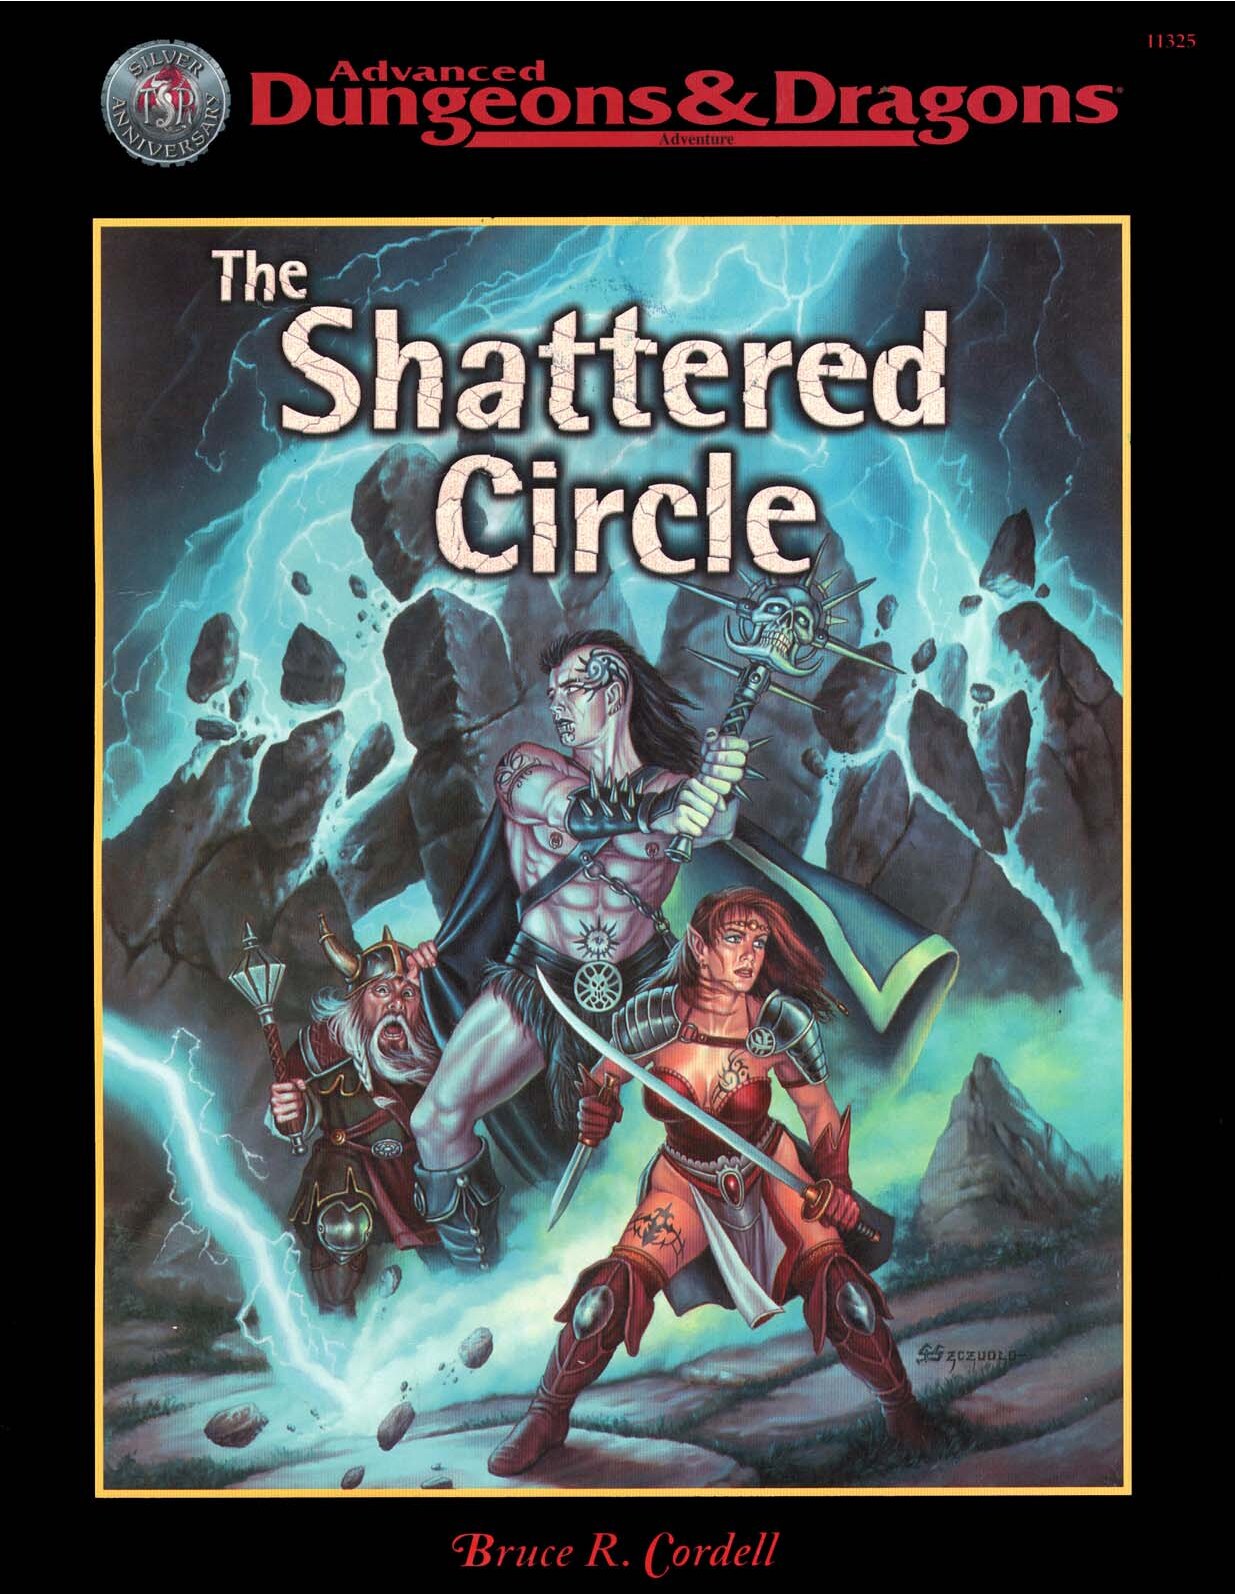 The Shattered Circle